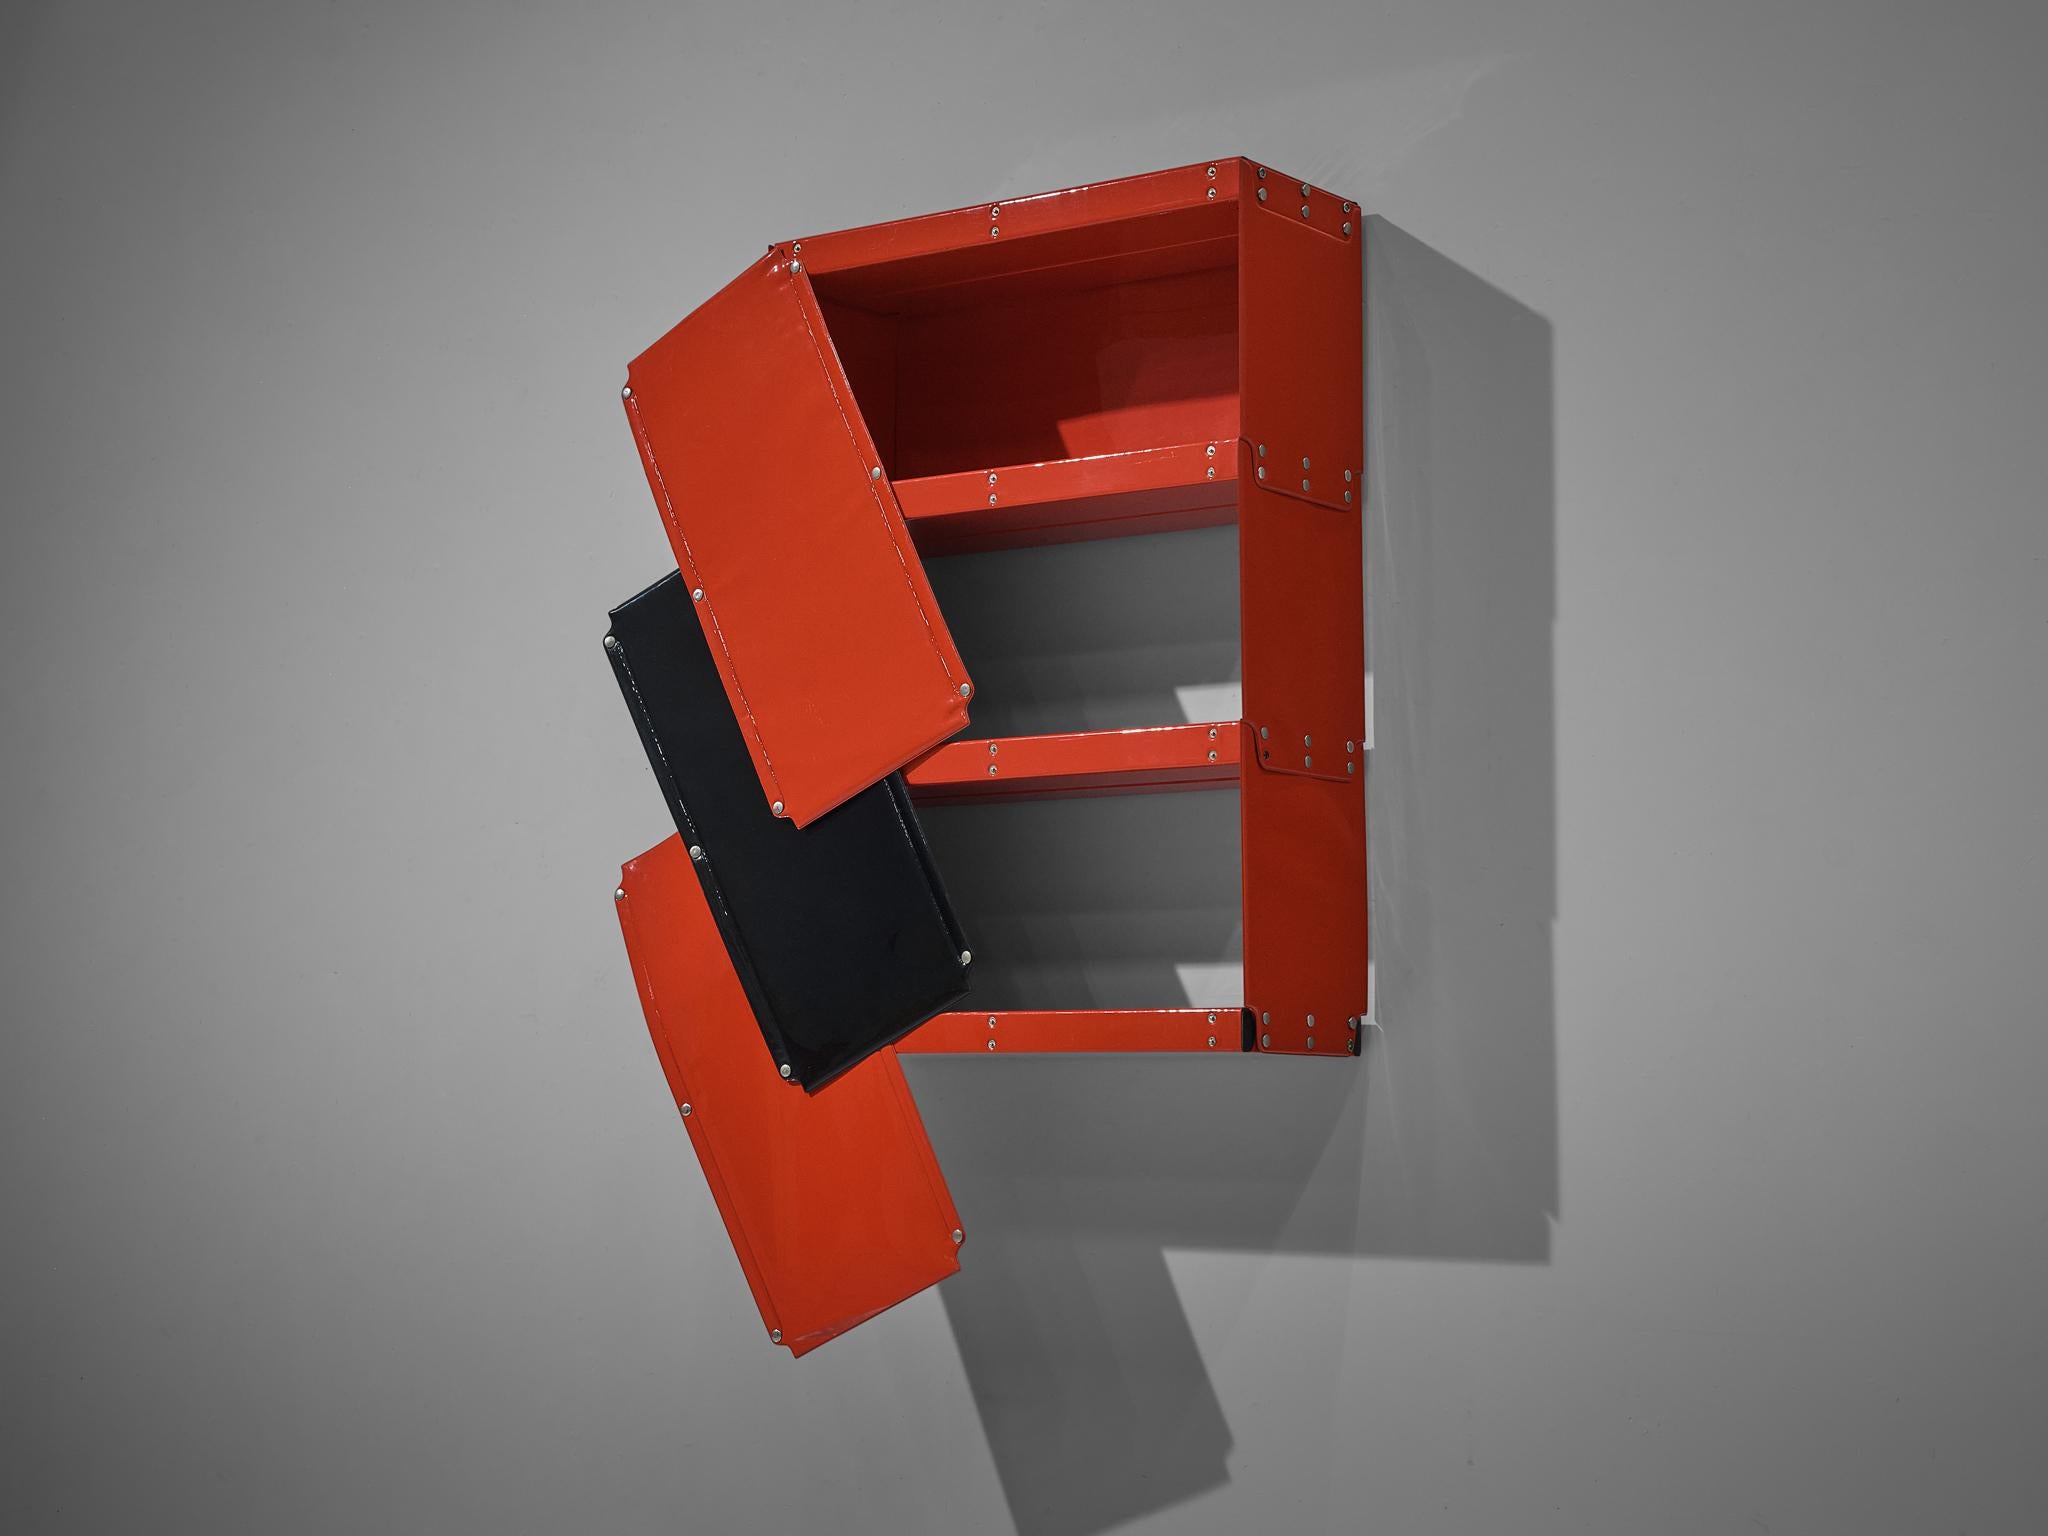 Otto Zapf for Zapfdesign 'Softline' red and black cabinets, plastic, Germany, 1969

Set of three detachable 'Softline' wall cabinets in red and black designed by the German designer Otto Zapf. Zippers and press studs form the connections and allow